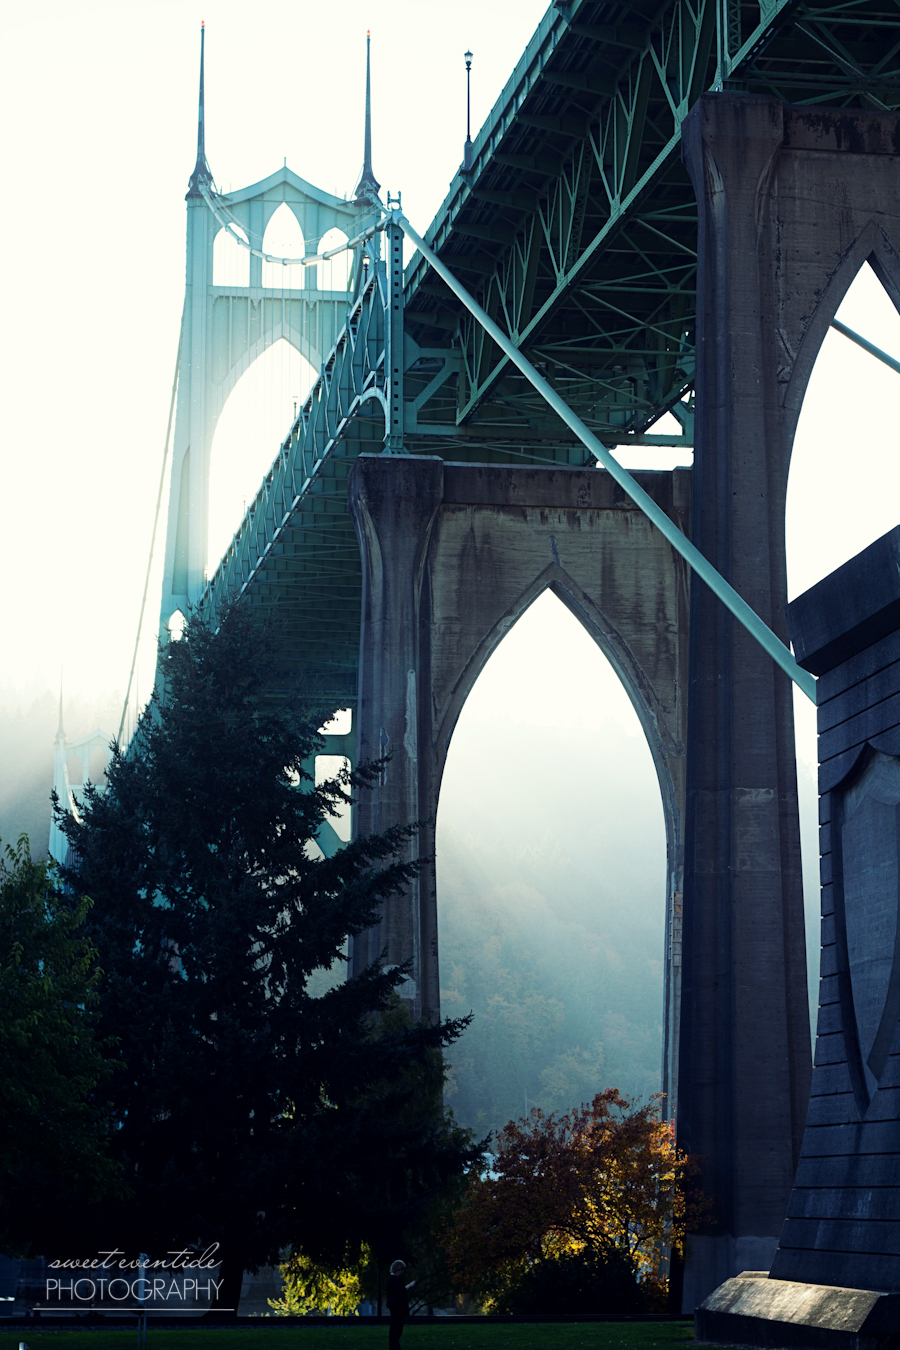 Photograph of the St. Johns Bridge in Portland, OR by Jessica Nichols